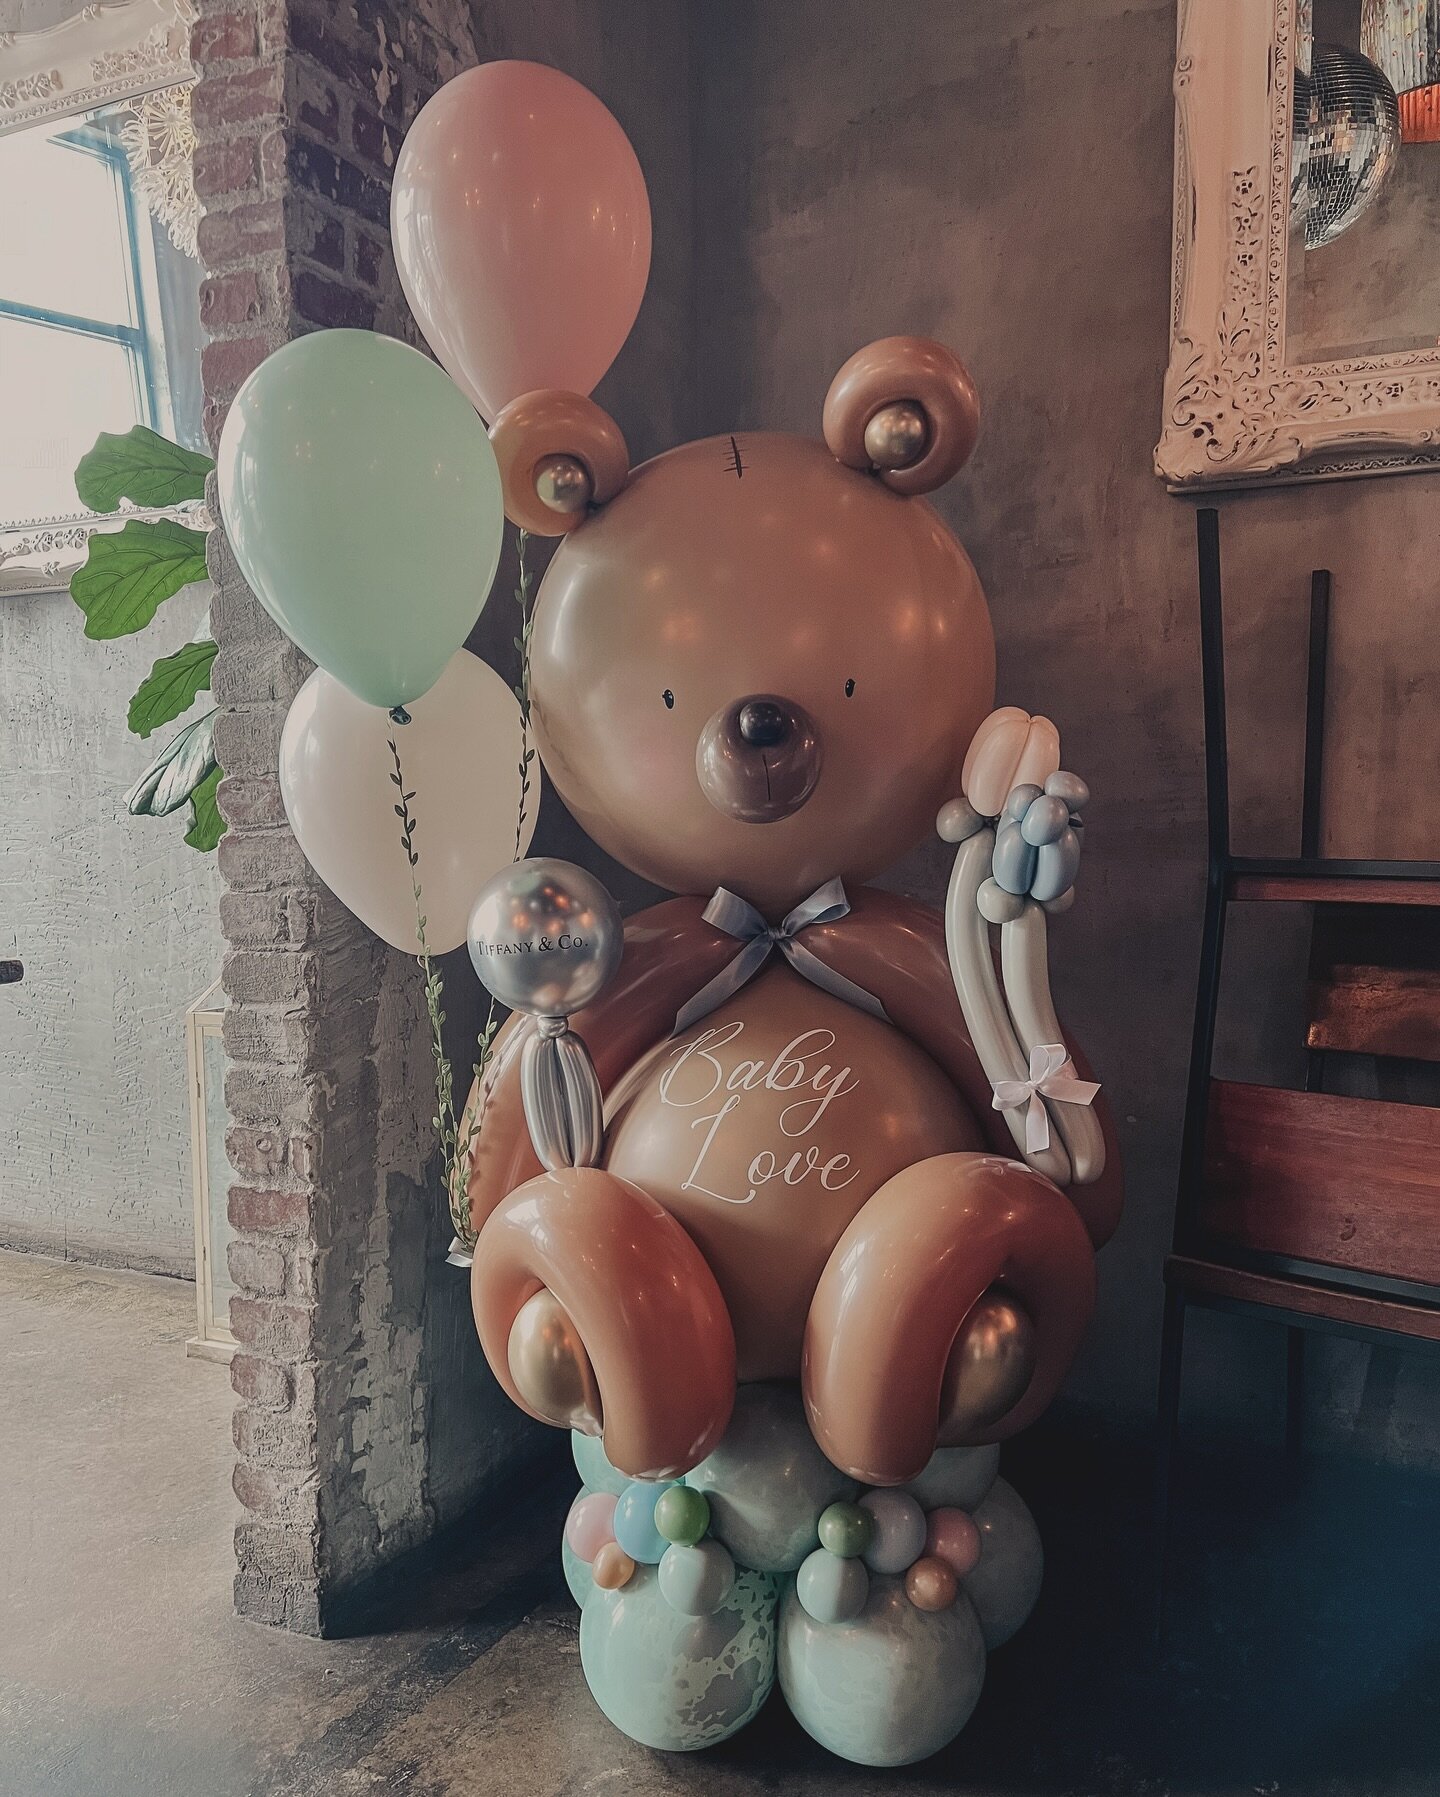 Our big bear for a baby bear! 
.

.
.
. #balloontower #balloon #birthdayballoons #birthday🎂 #balloons #organic balloons #balloonprofessional #balloonmosaic ballooncolumn #balloonarrangement #balloonmarquee #obsessed #🎈 #vail #balloonstylist #organi